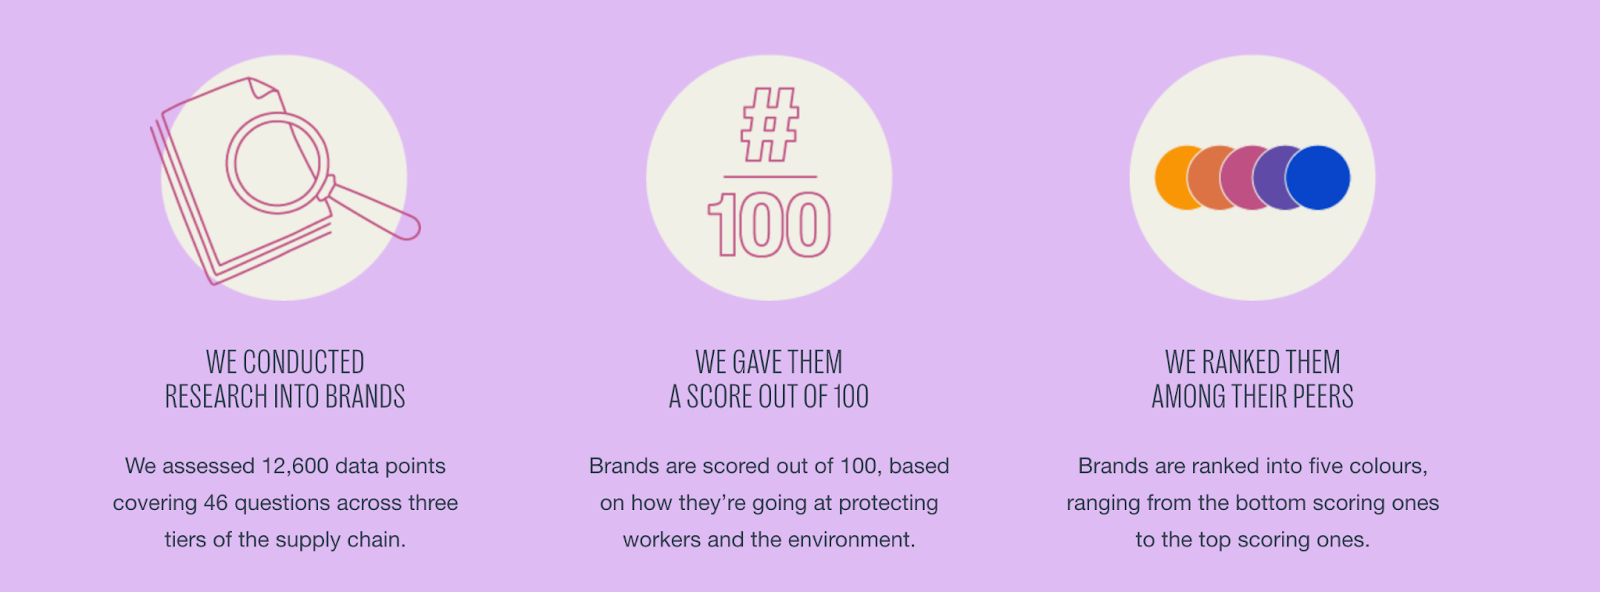 Ethical fashion rankings: The top and bottom brands (and those who declined)